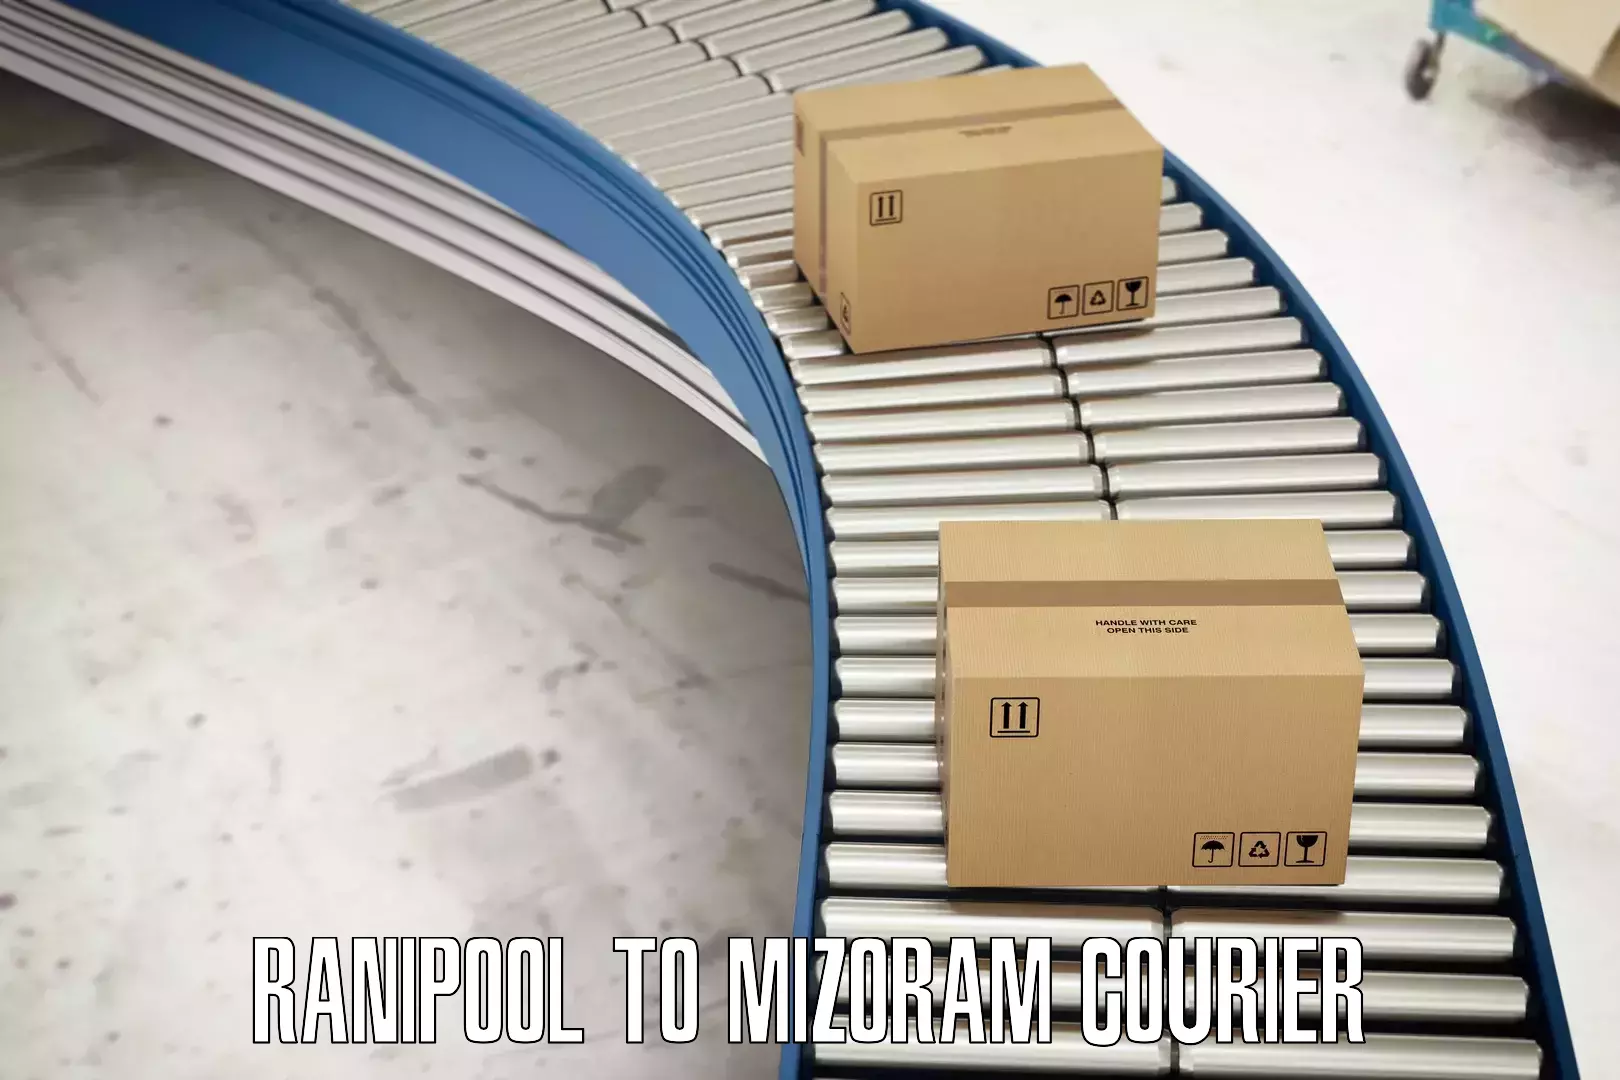 Efficient order fulfillment in Ranipool to Hnahthial